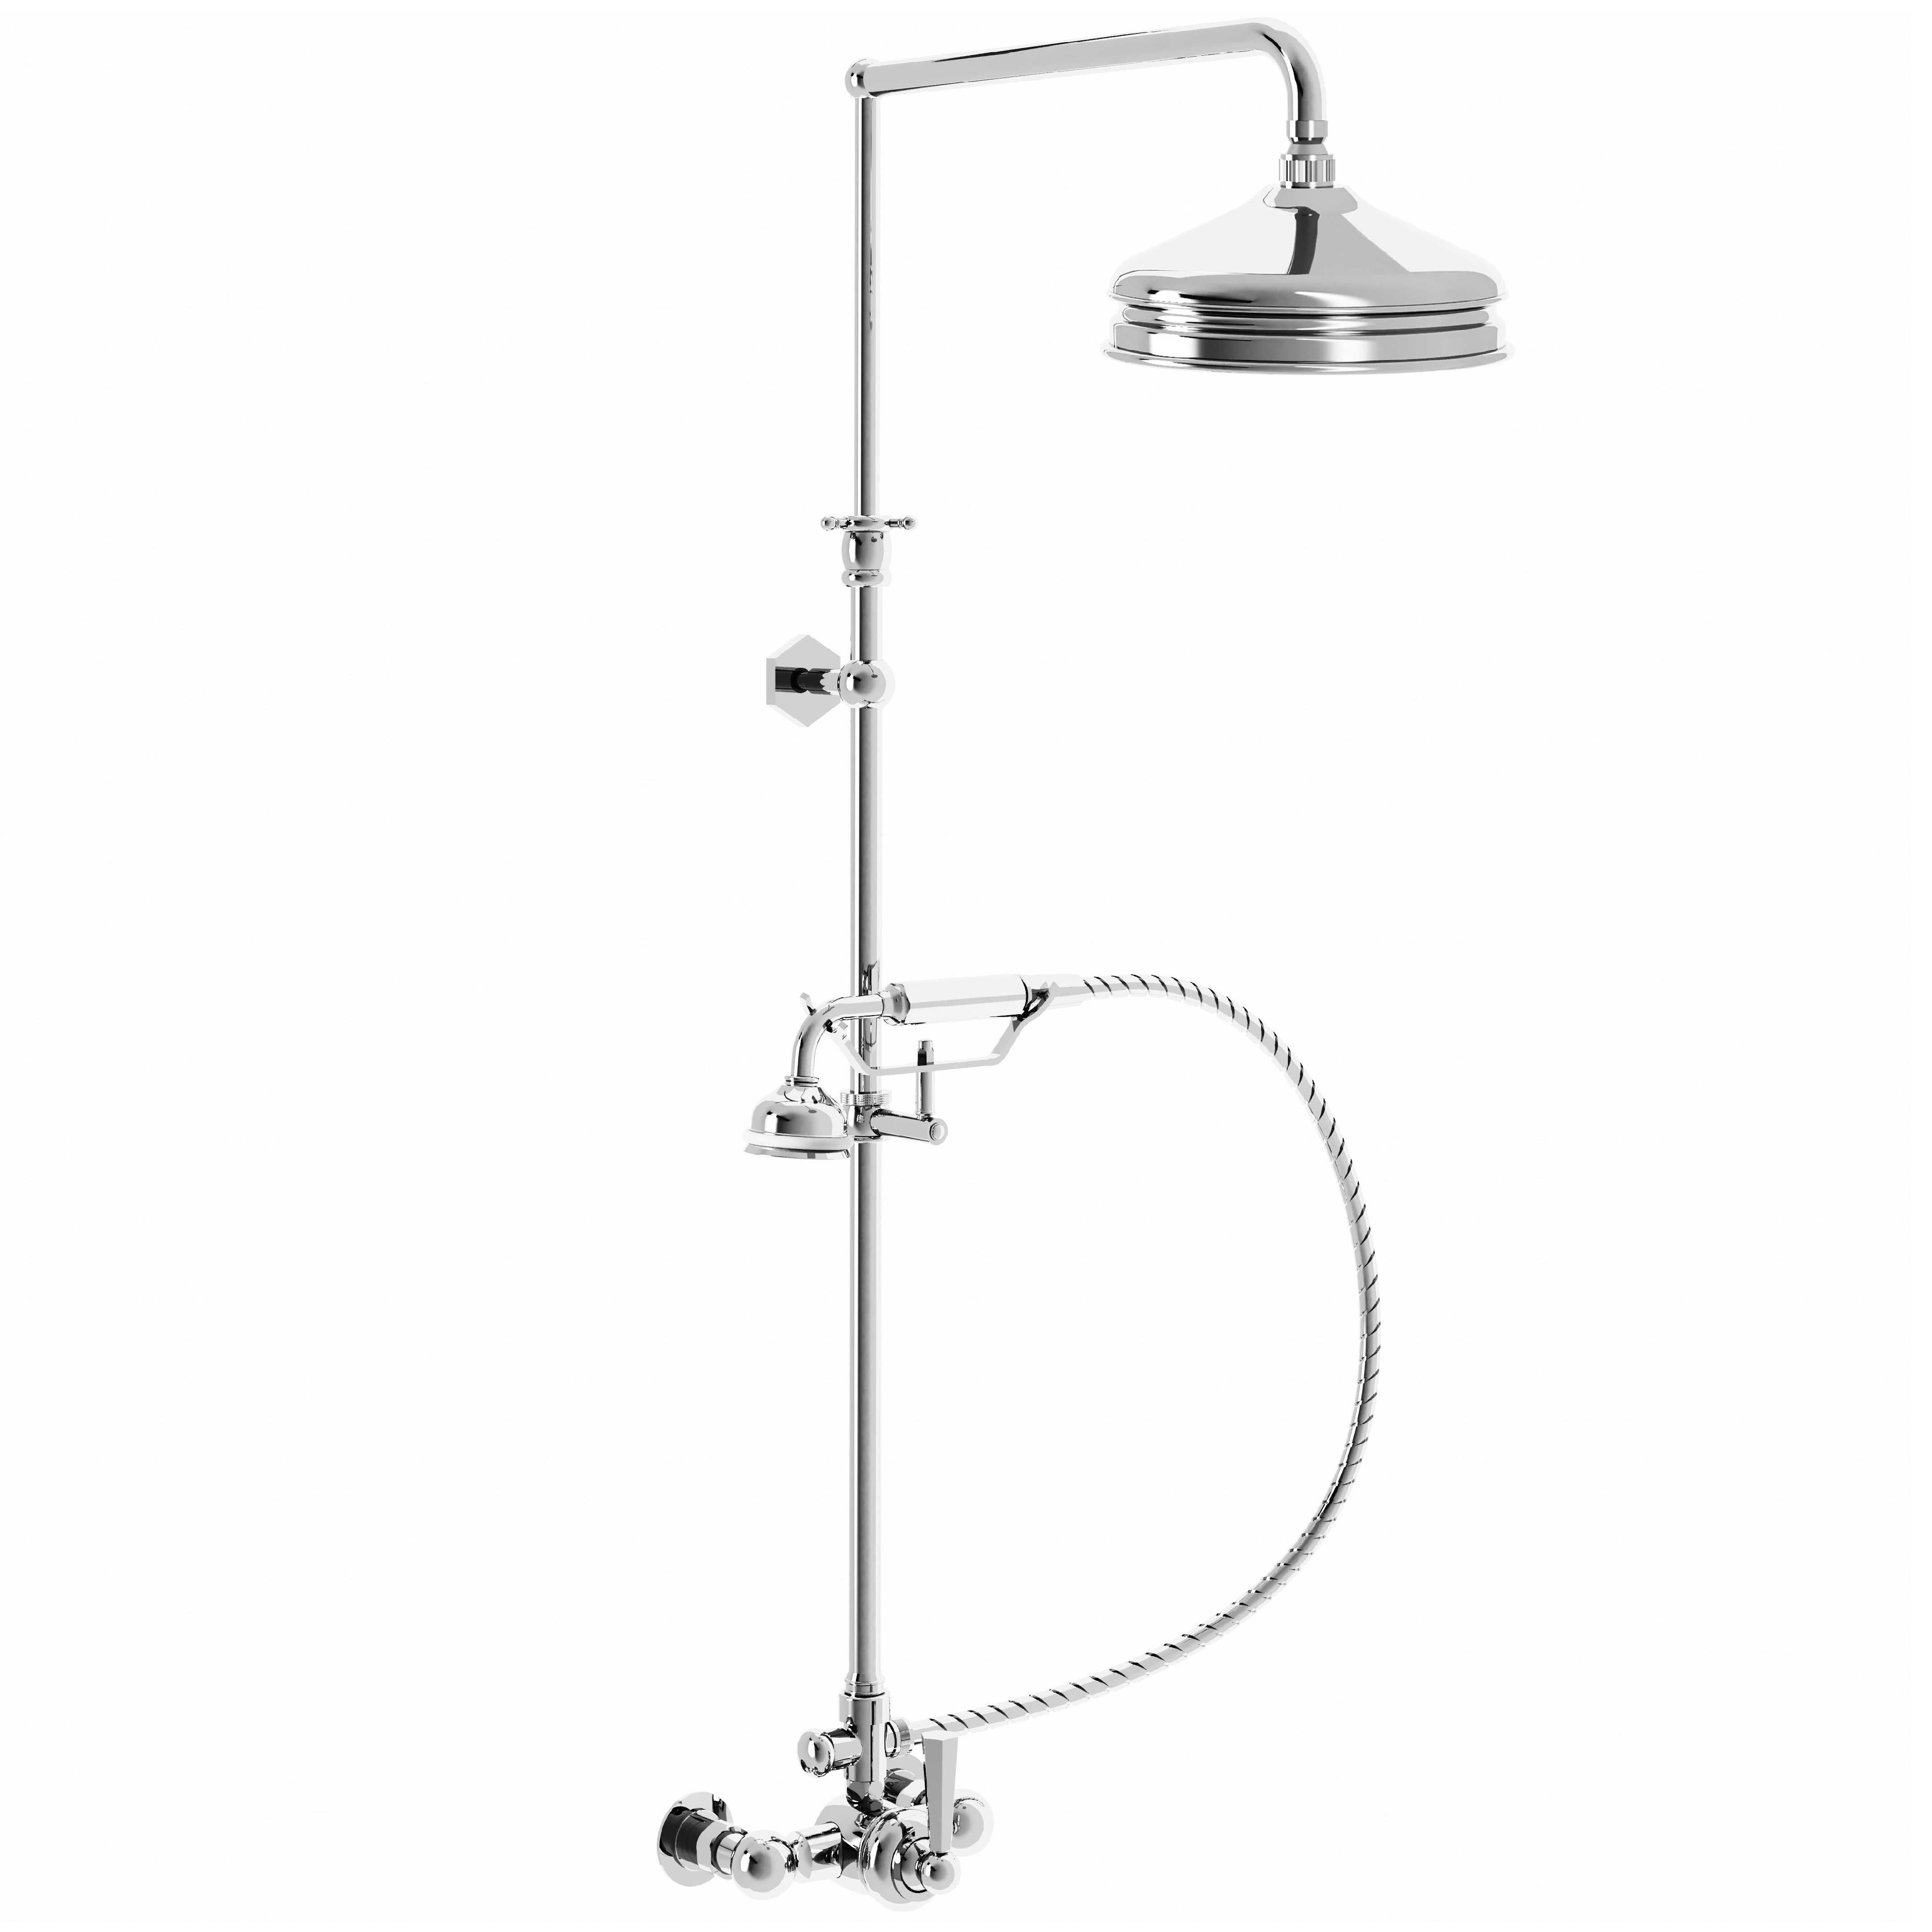 M38-2204M Single-lever shower mixer with column, anti-scaling